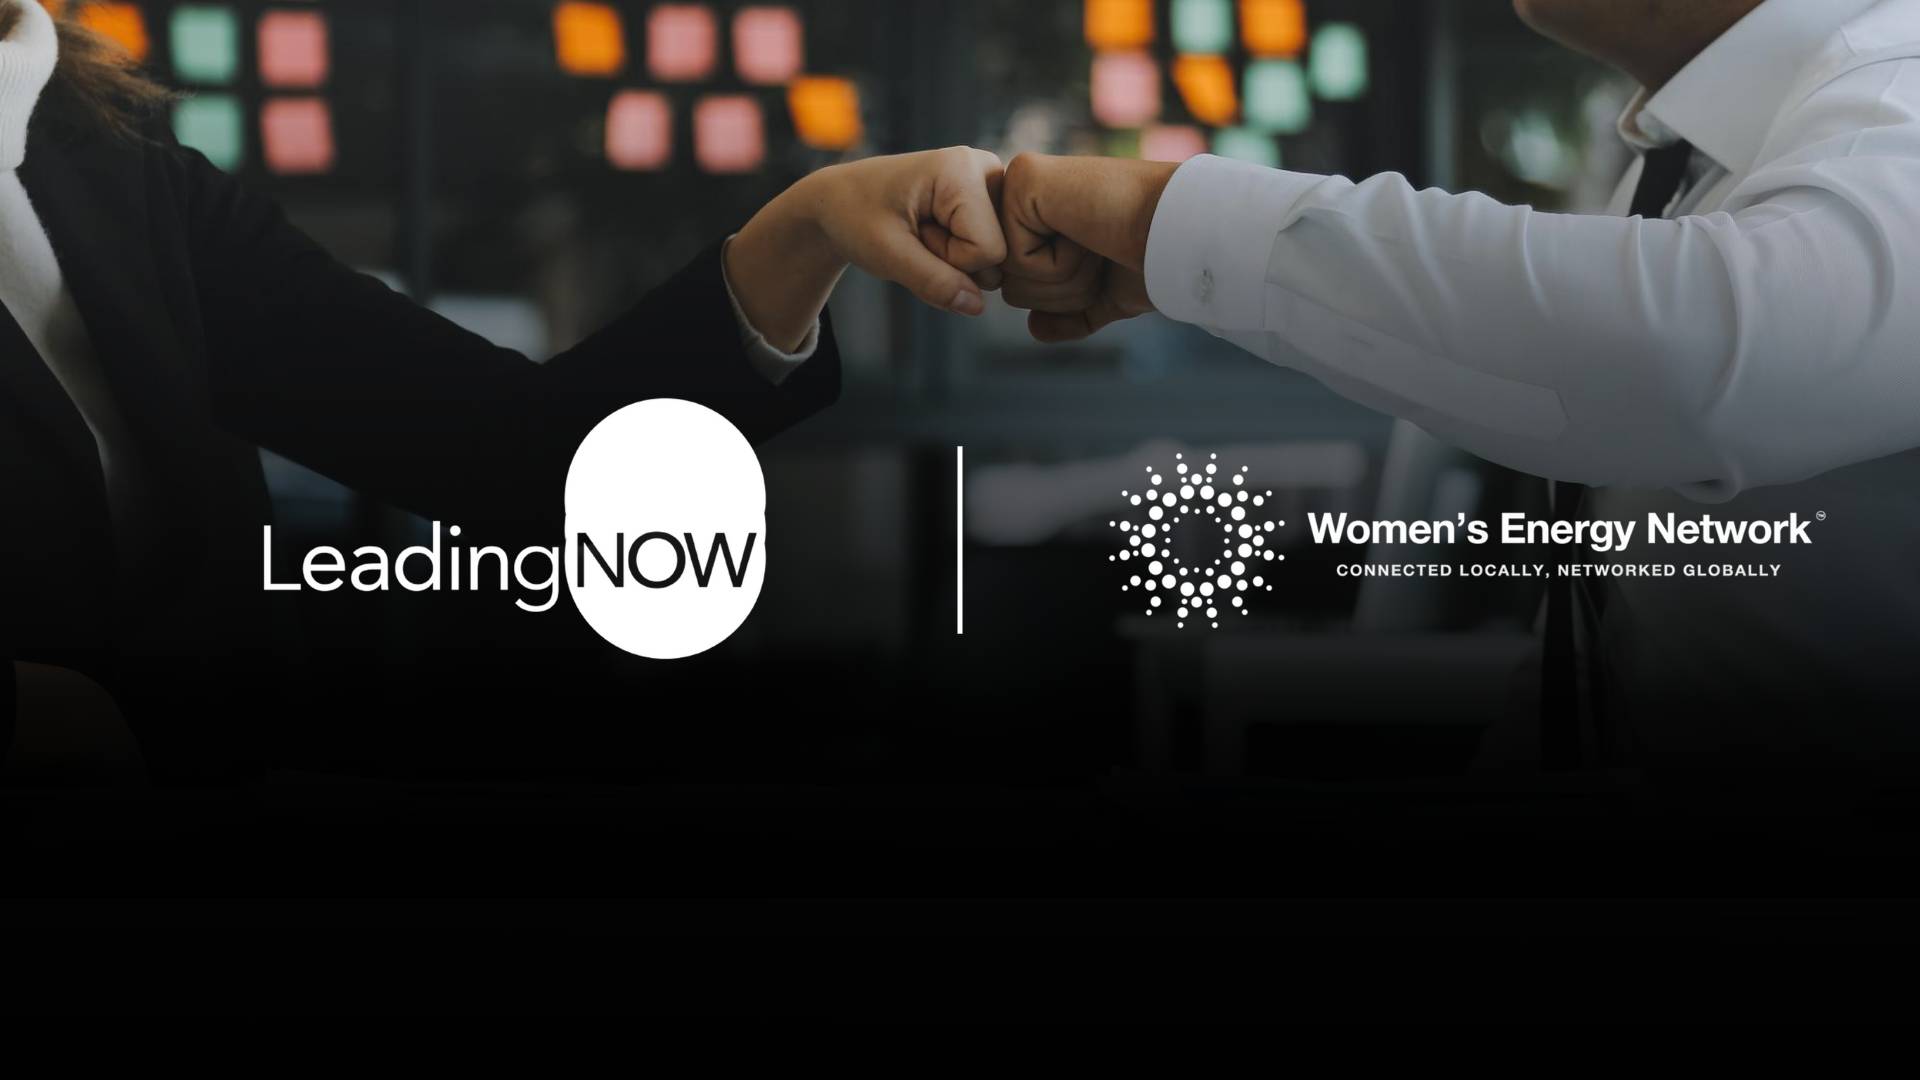 "Leading NOW Partners with Women's Energy Network (WEN) to Advance Women's Leadership in the Energy Industry"